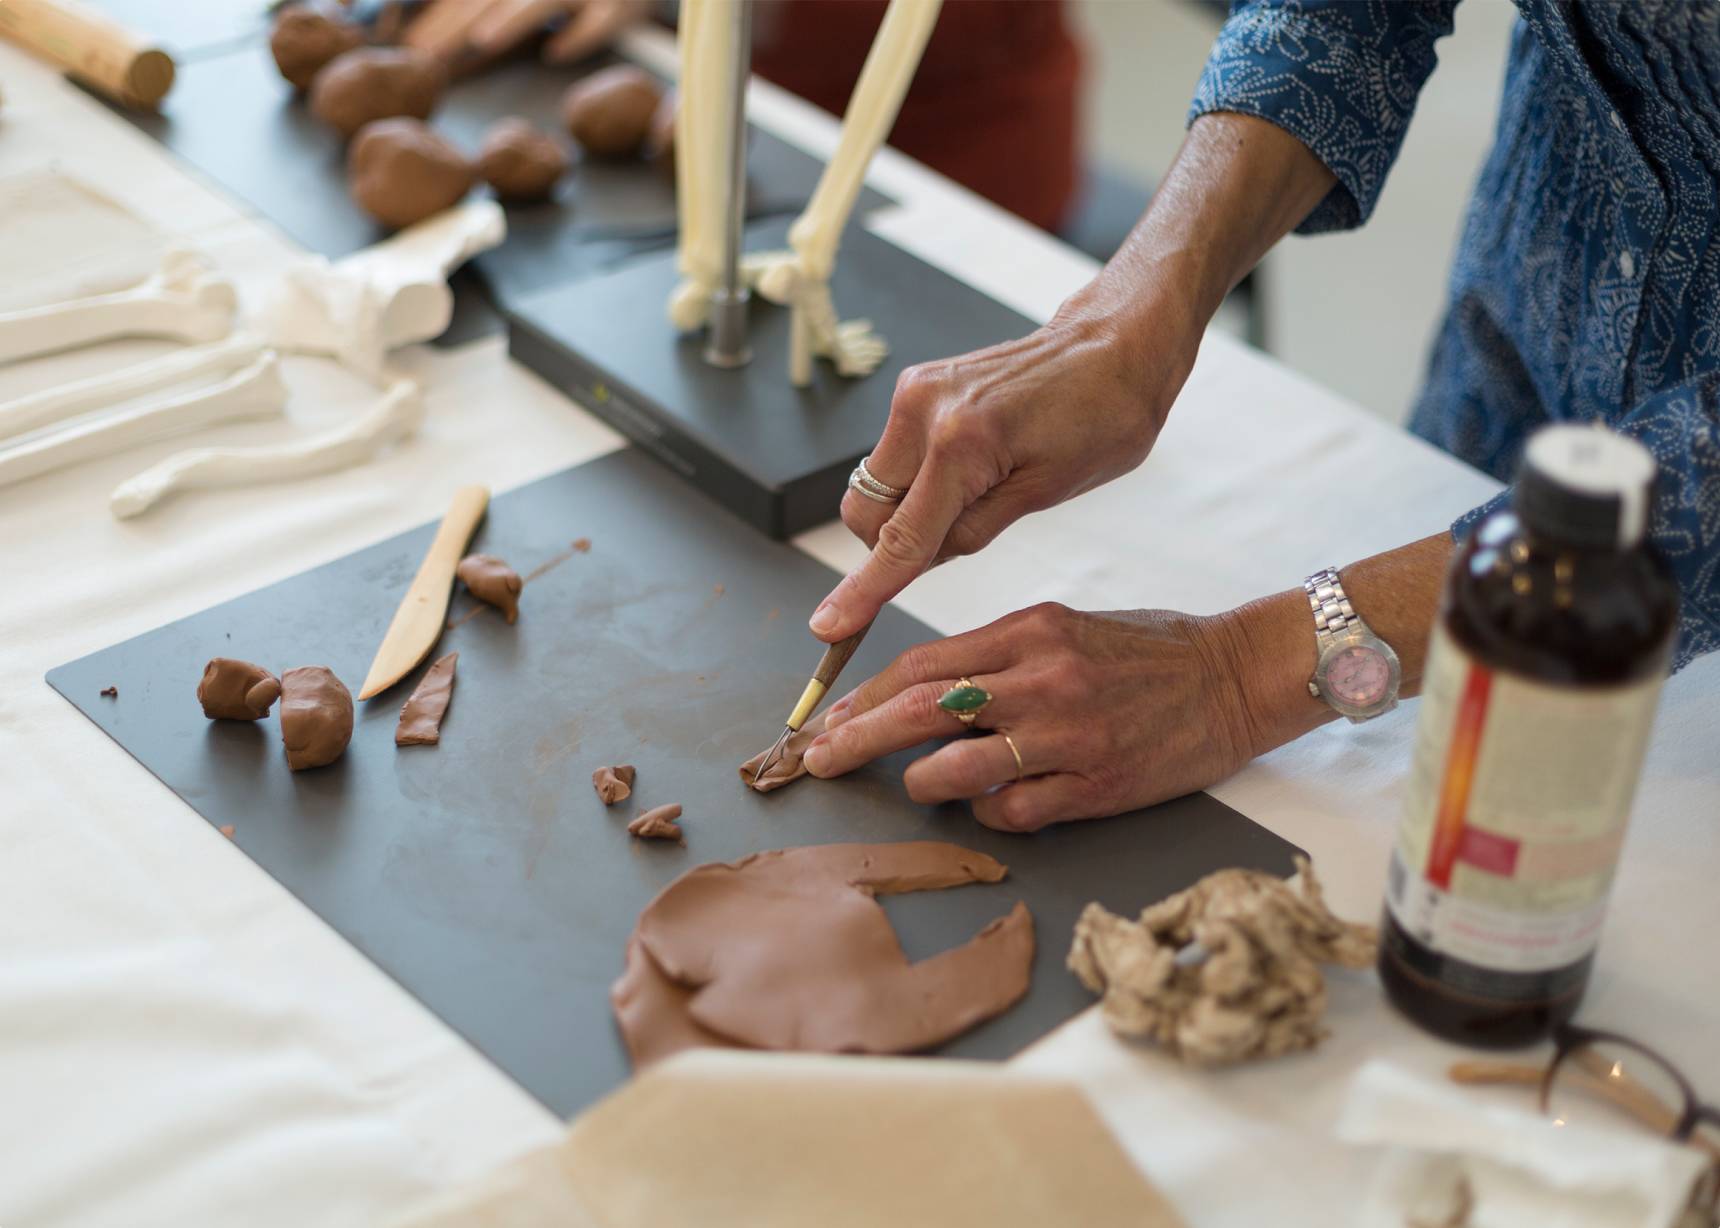 Anatomy modeling clay for hands-on learning and education